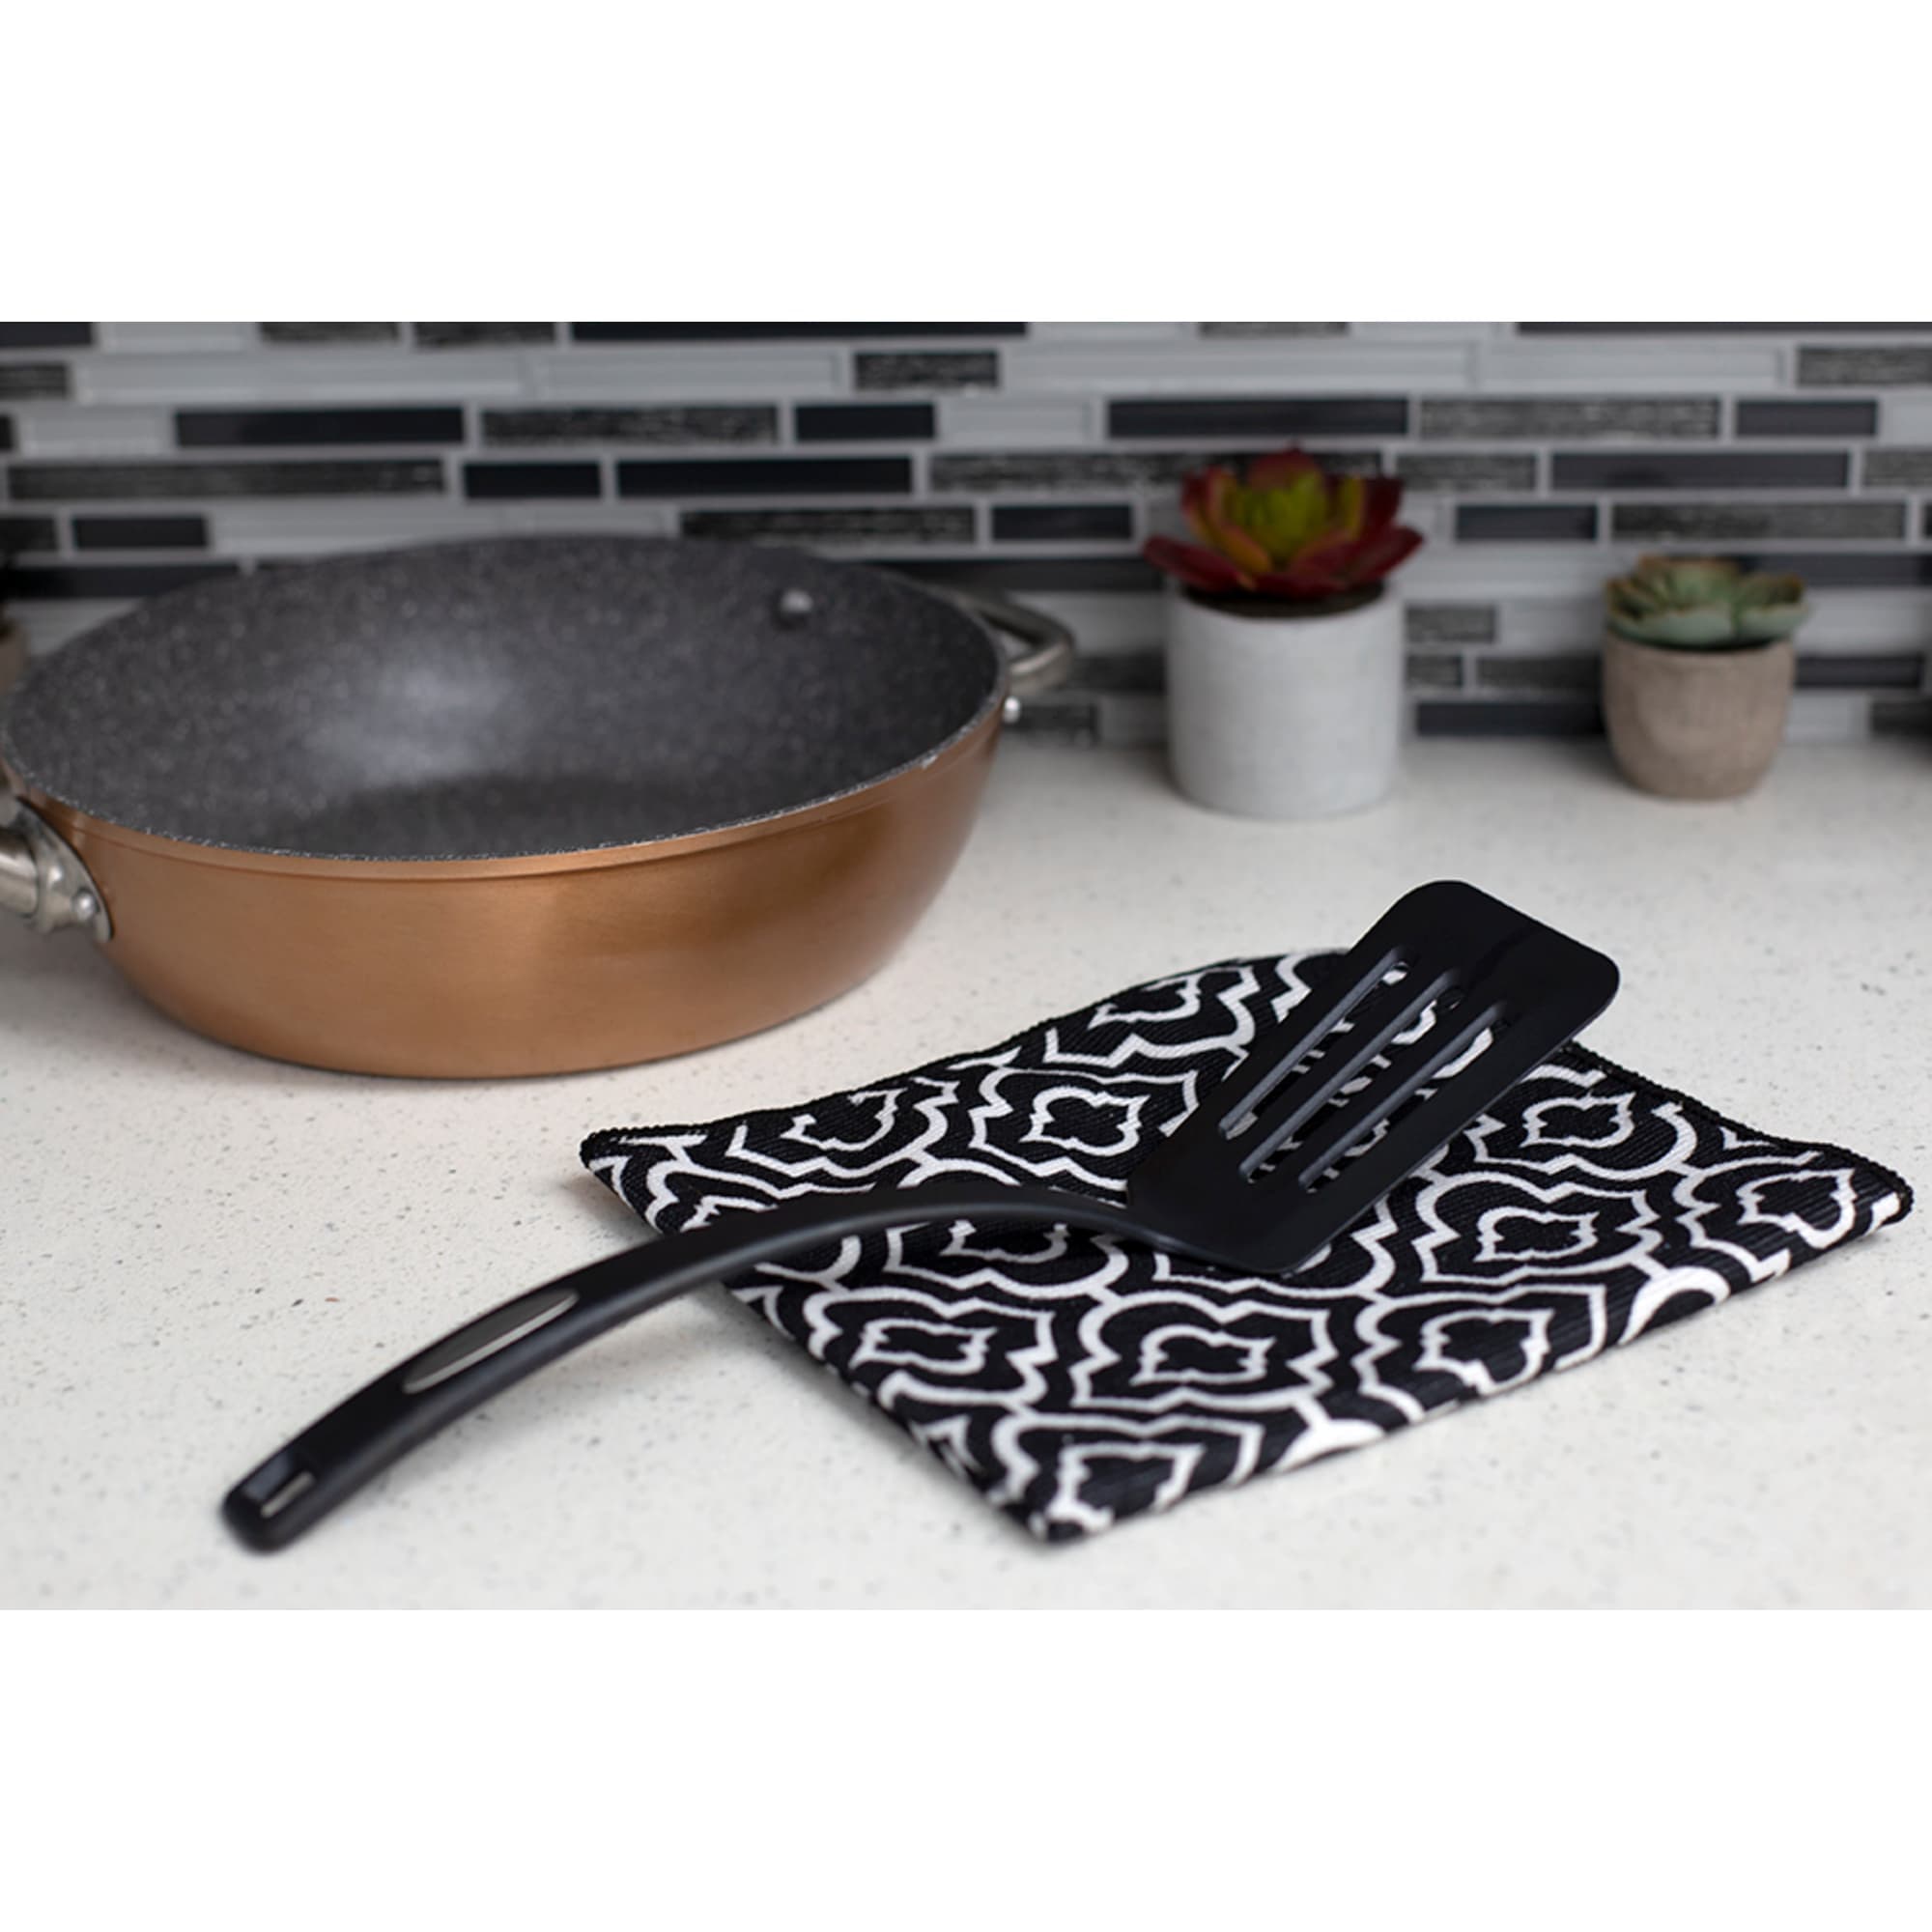 Home Basics Flexible Nylon Non-Stick Slotted Spatula with Curved Handle, Black $1.00 EACH, CASE PACK OF 24